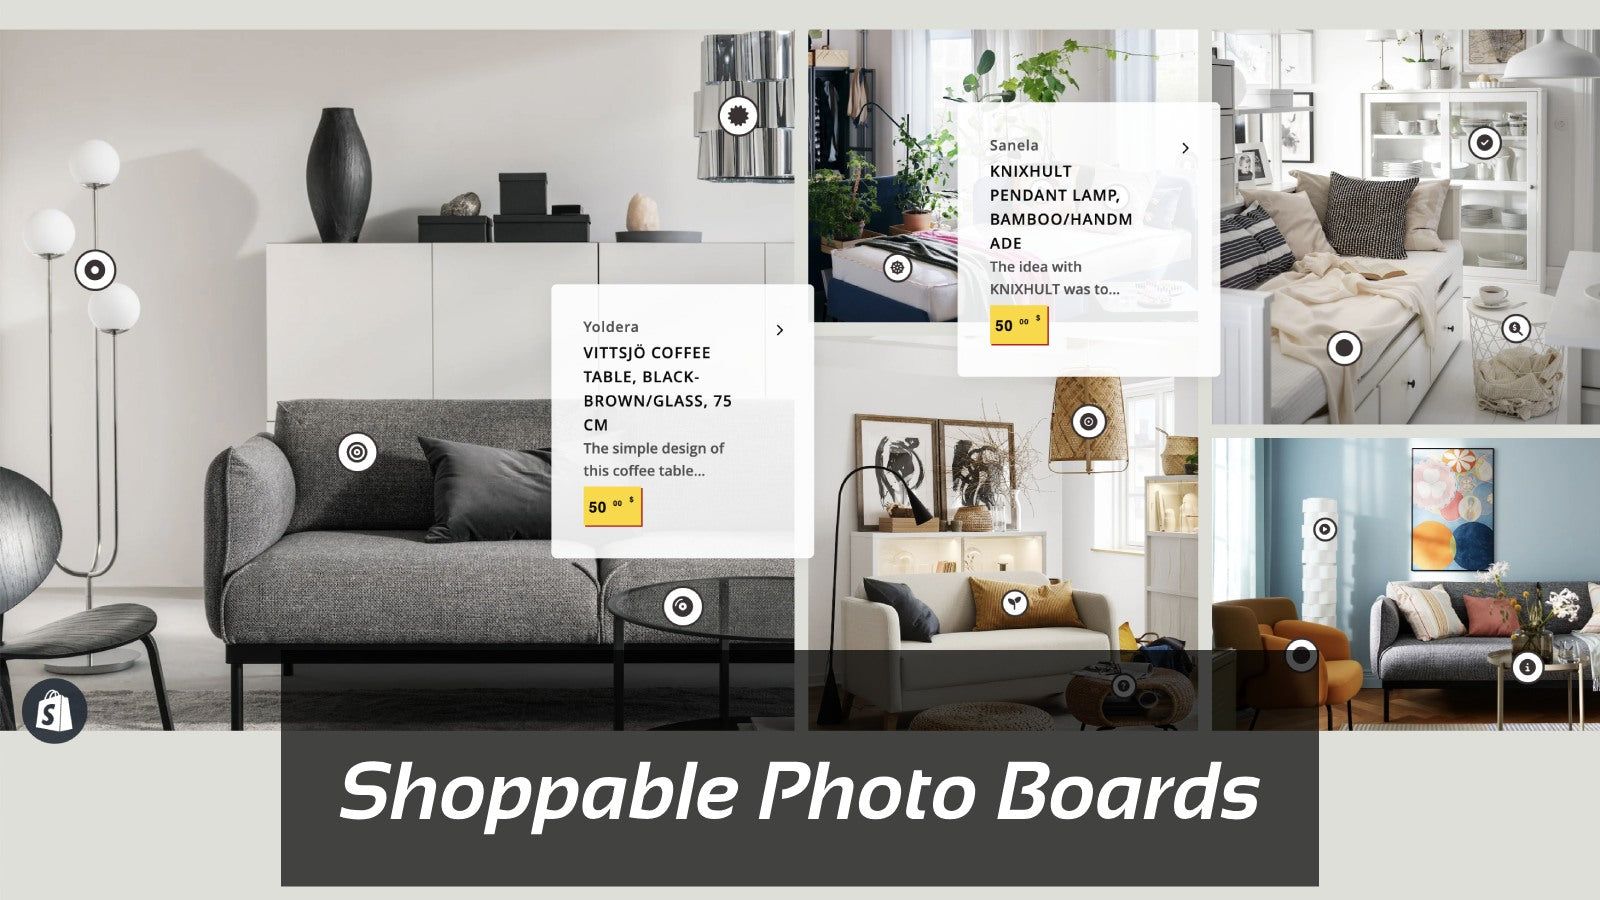 Attract customers with Shoppable Boards